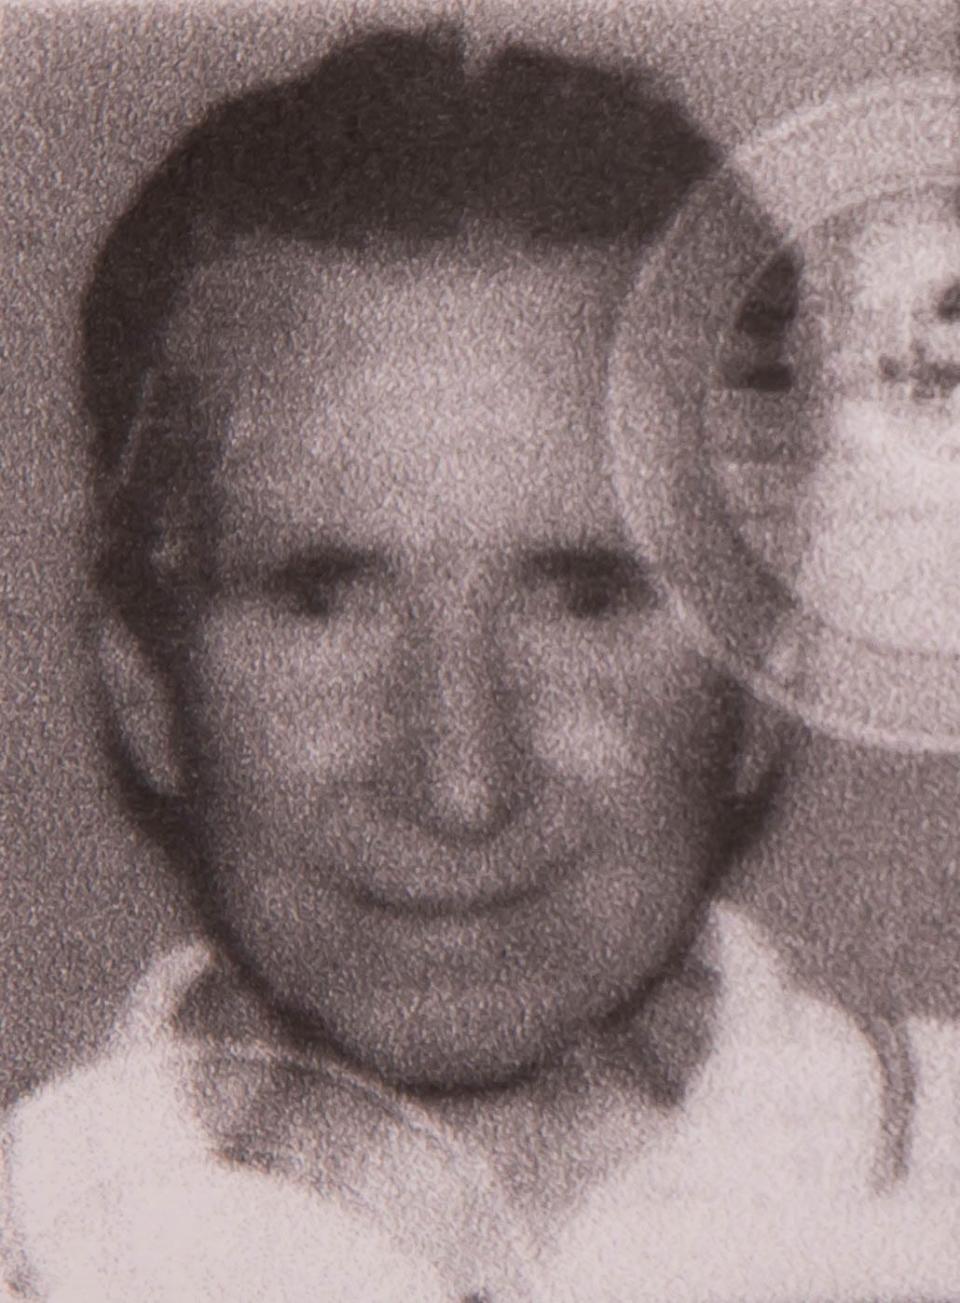 Charles Wesley, a veteran, died in December and no one claimed his body. This is a photo of his driver's license picture. [Doug Engle/Ocala Star Banner]2022